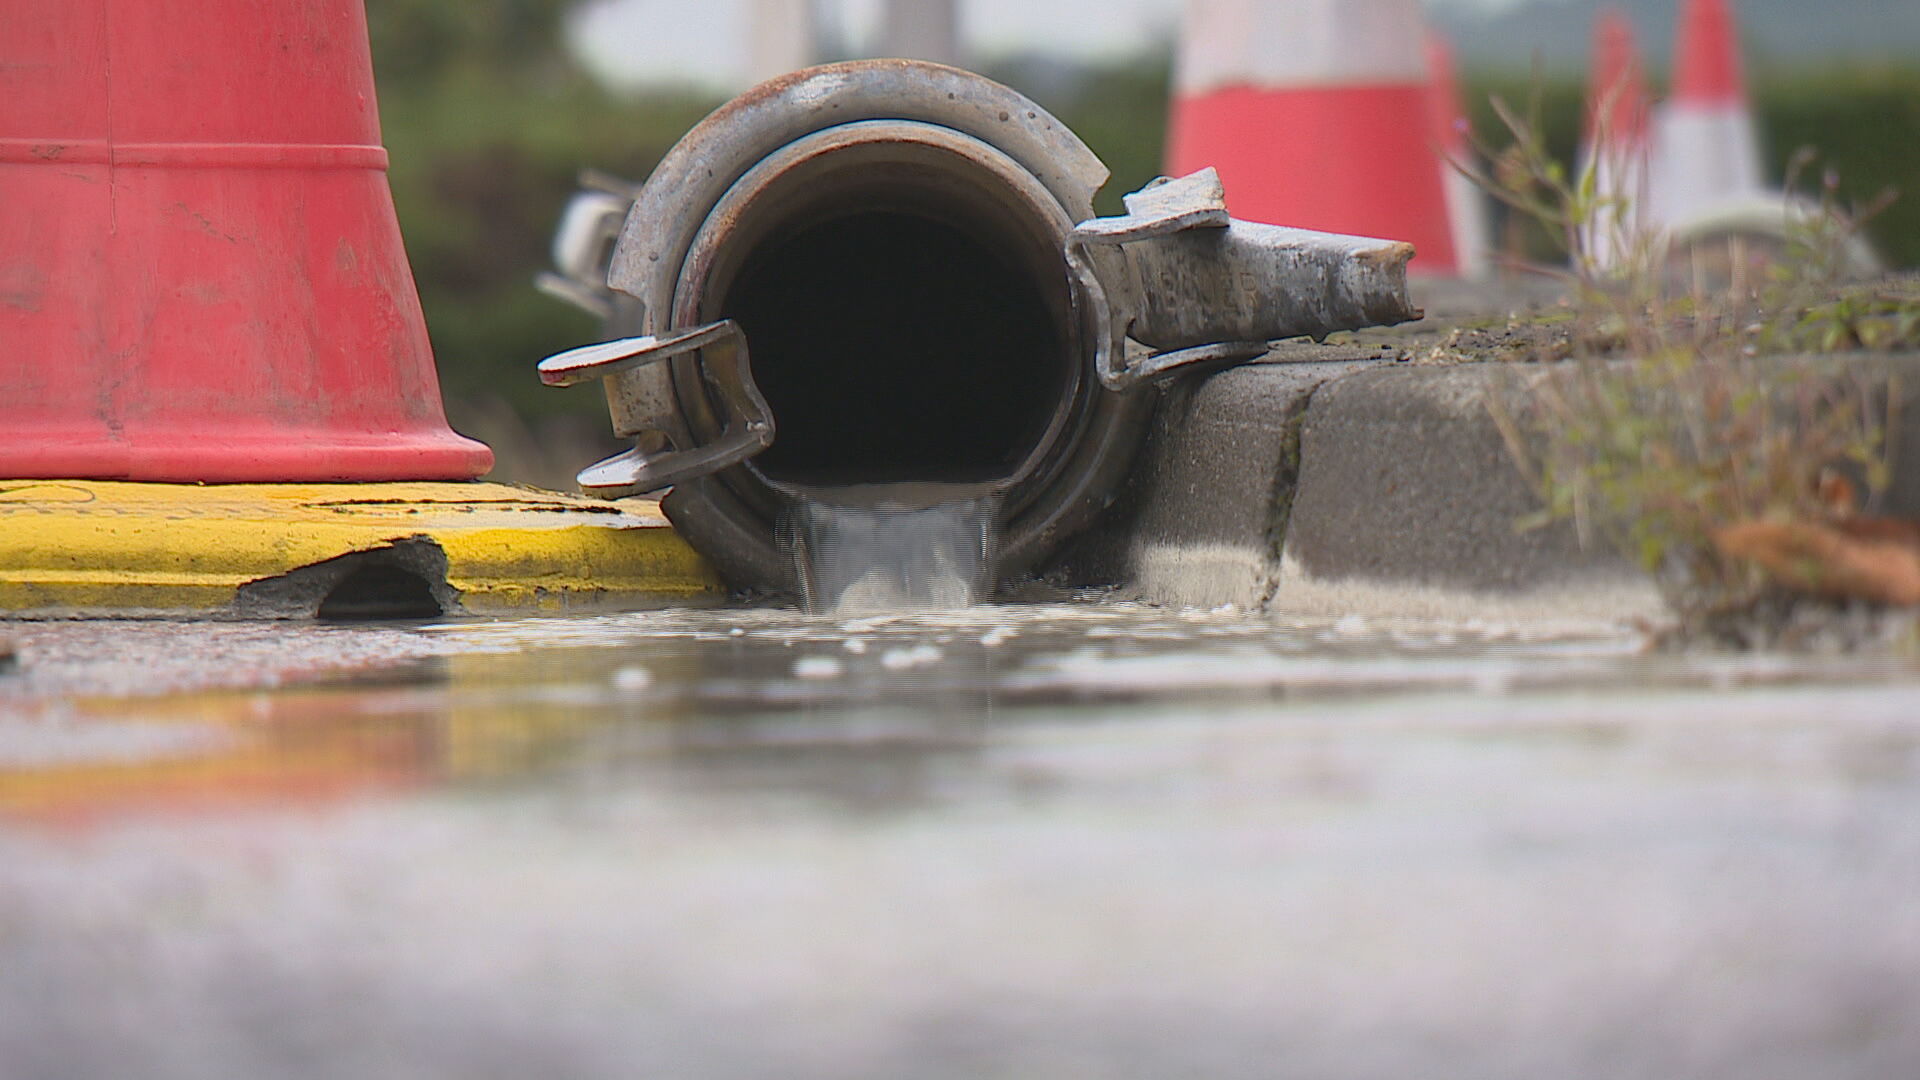 The Marine Conservation Society is calling for better monitoring of Scotland's sewage system.